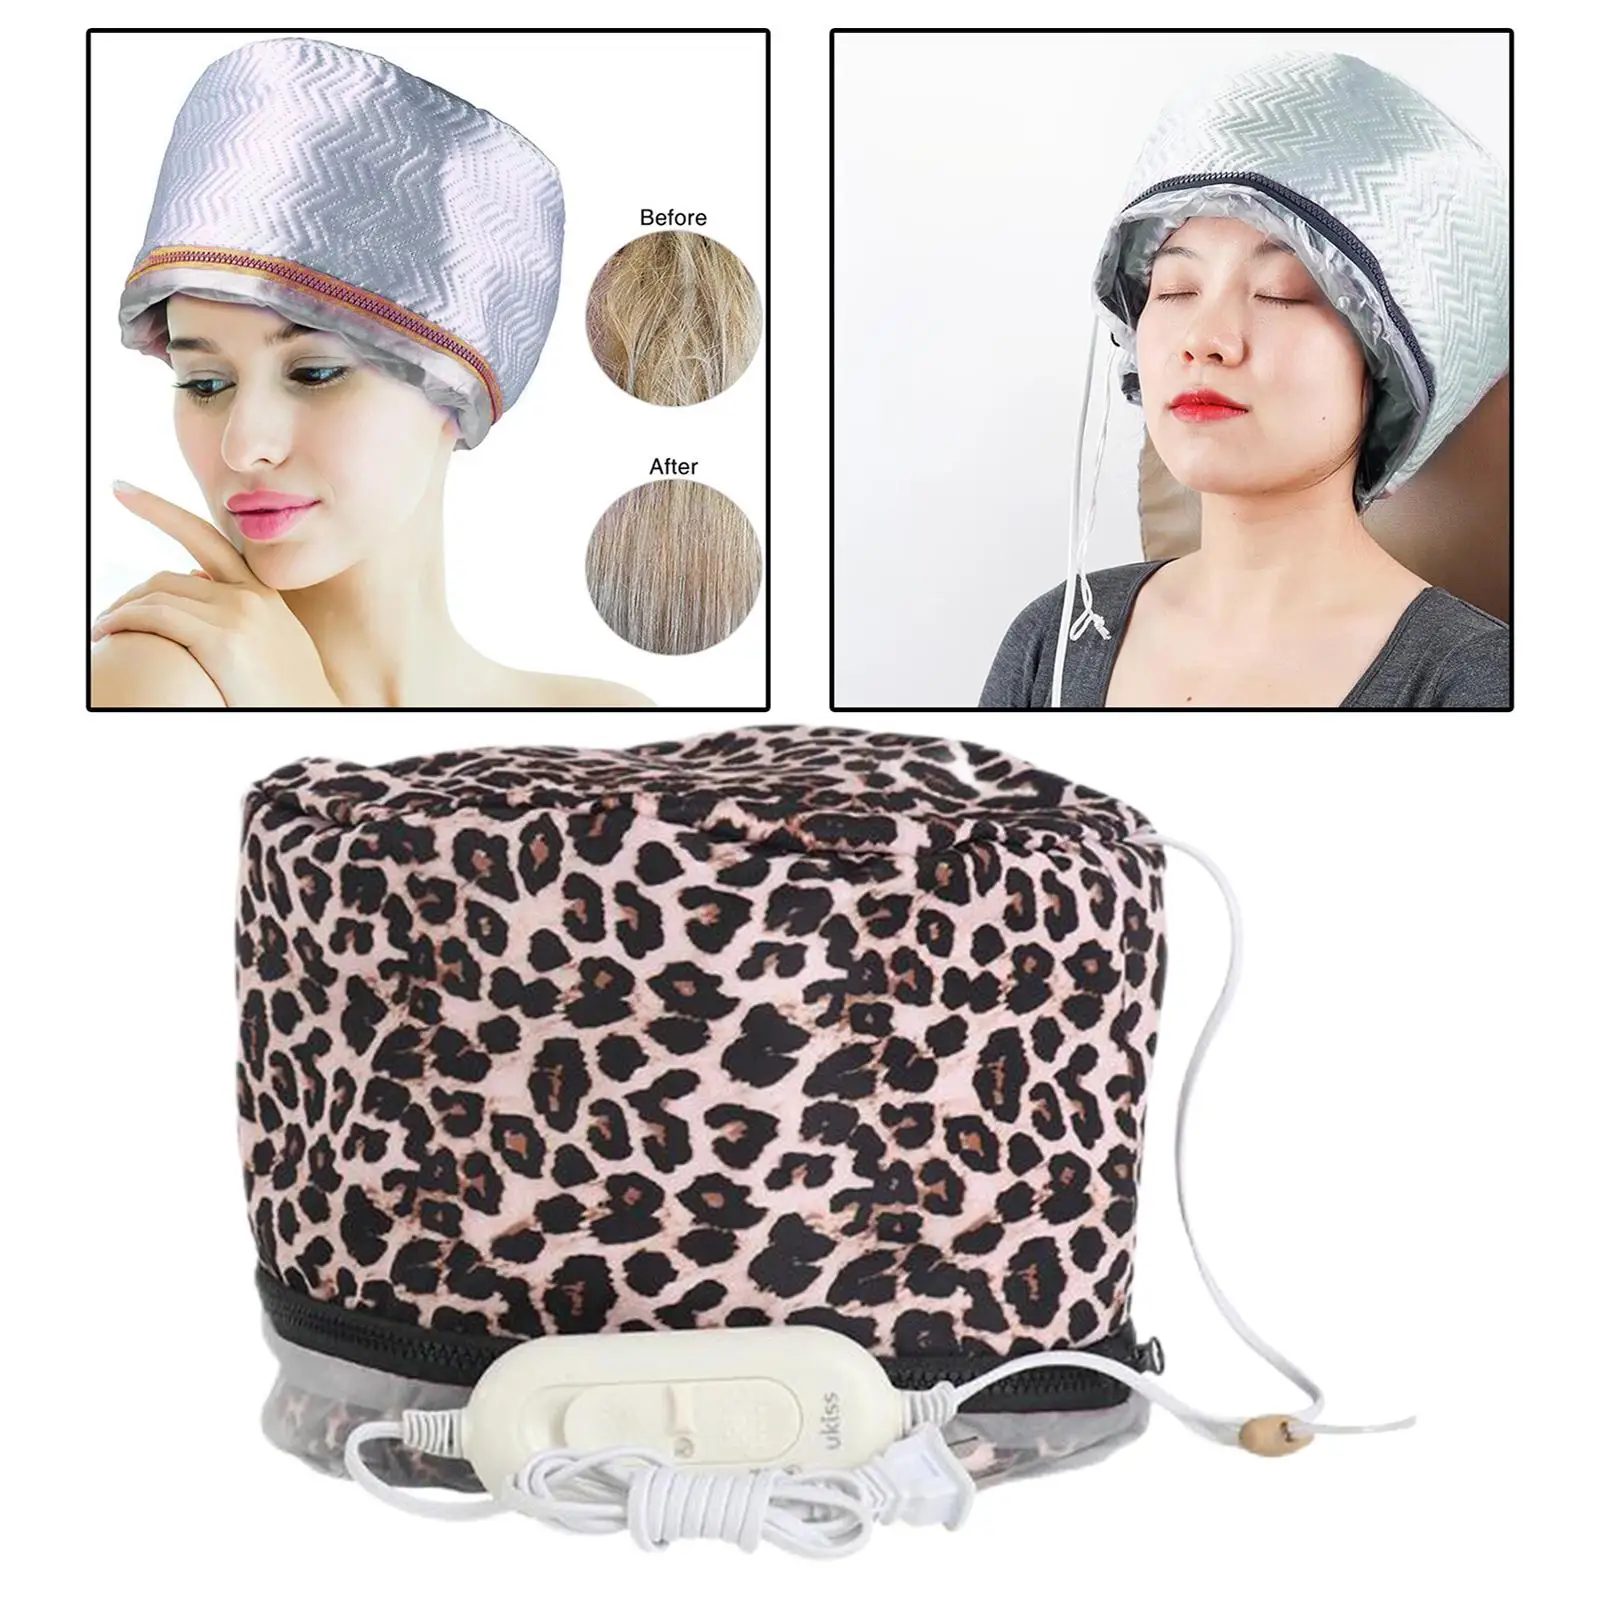 Hair Steamer Heating Hat Deep Conditioning Moisturize Beauty Steamer Thermal Caps Heat Caps 3 Level Temperature Control Home US